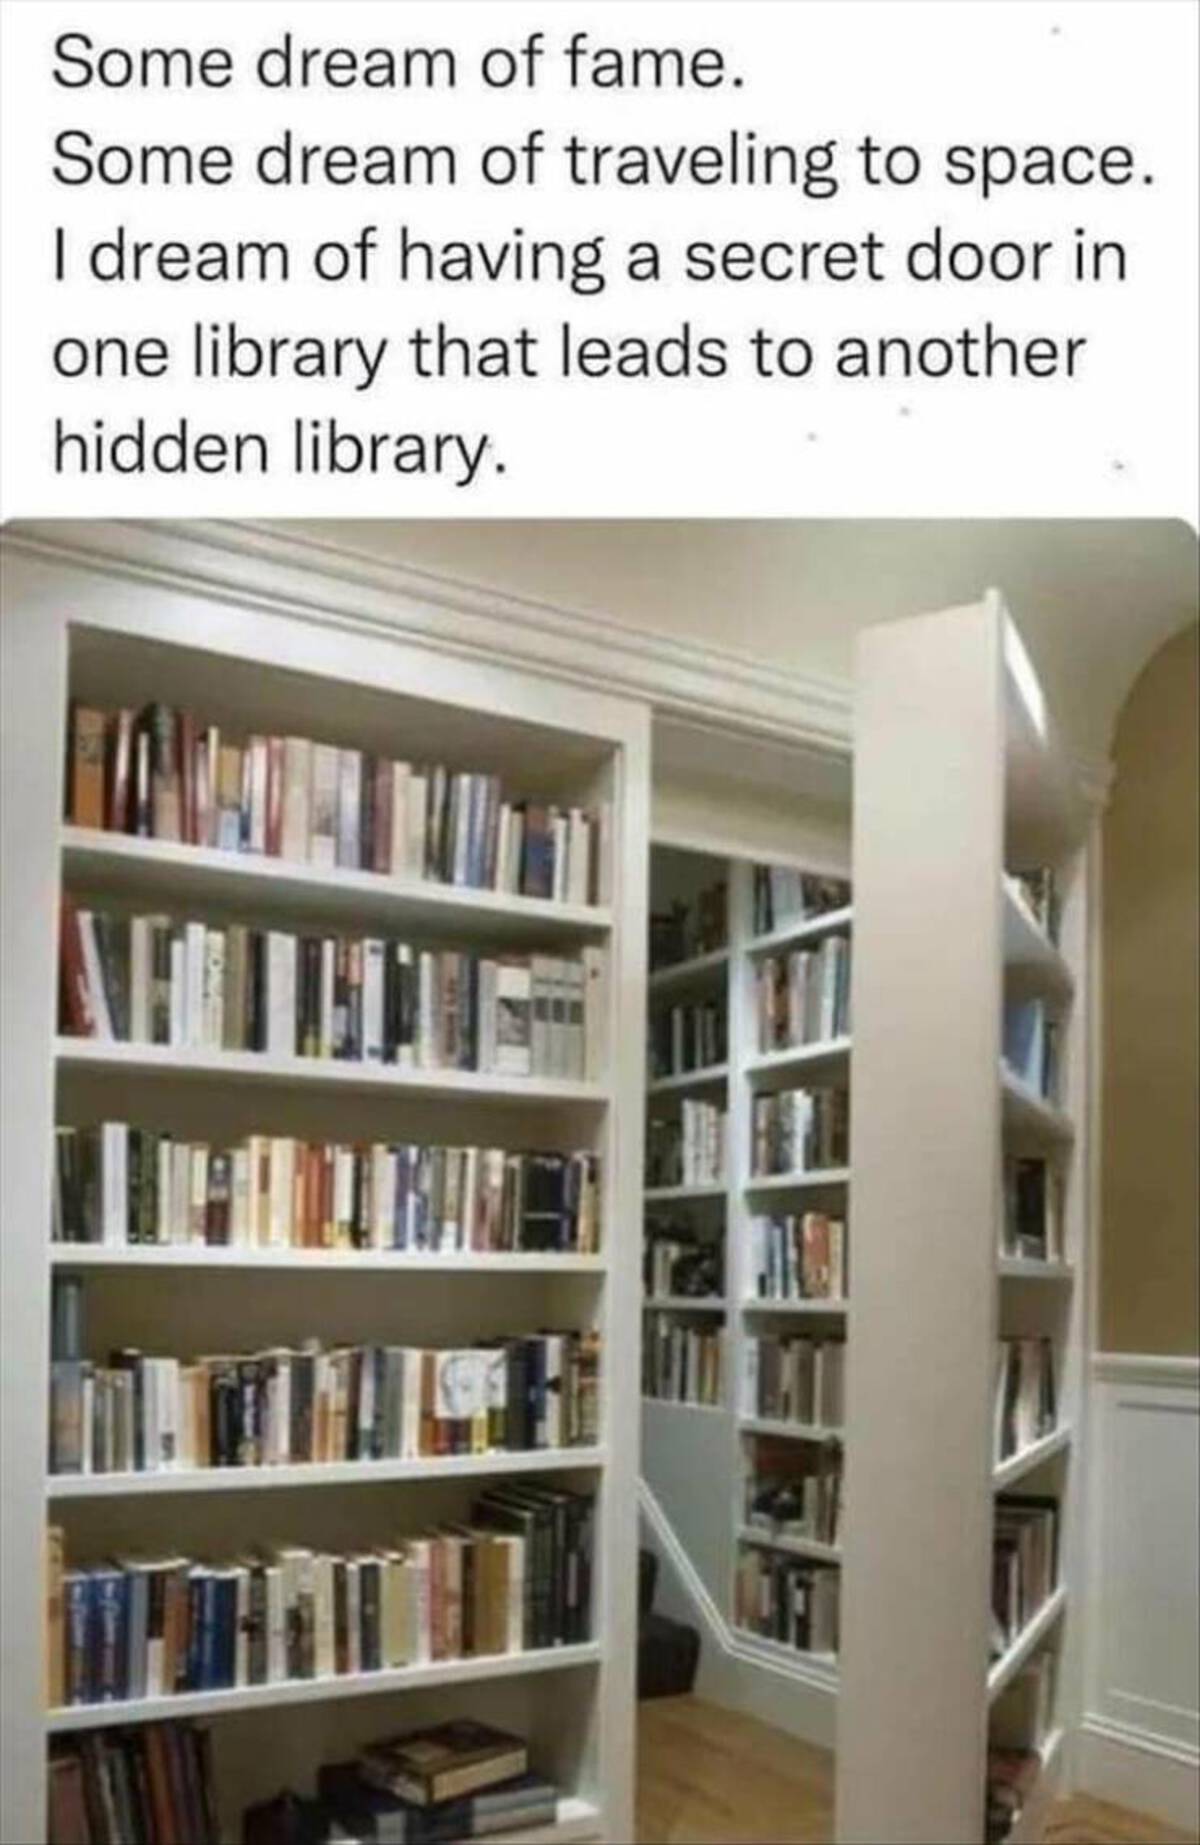 Some dream of fame. Some dream of traveling to space. I dream of having a secret door in one library that leads to another hidden library. Jest